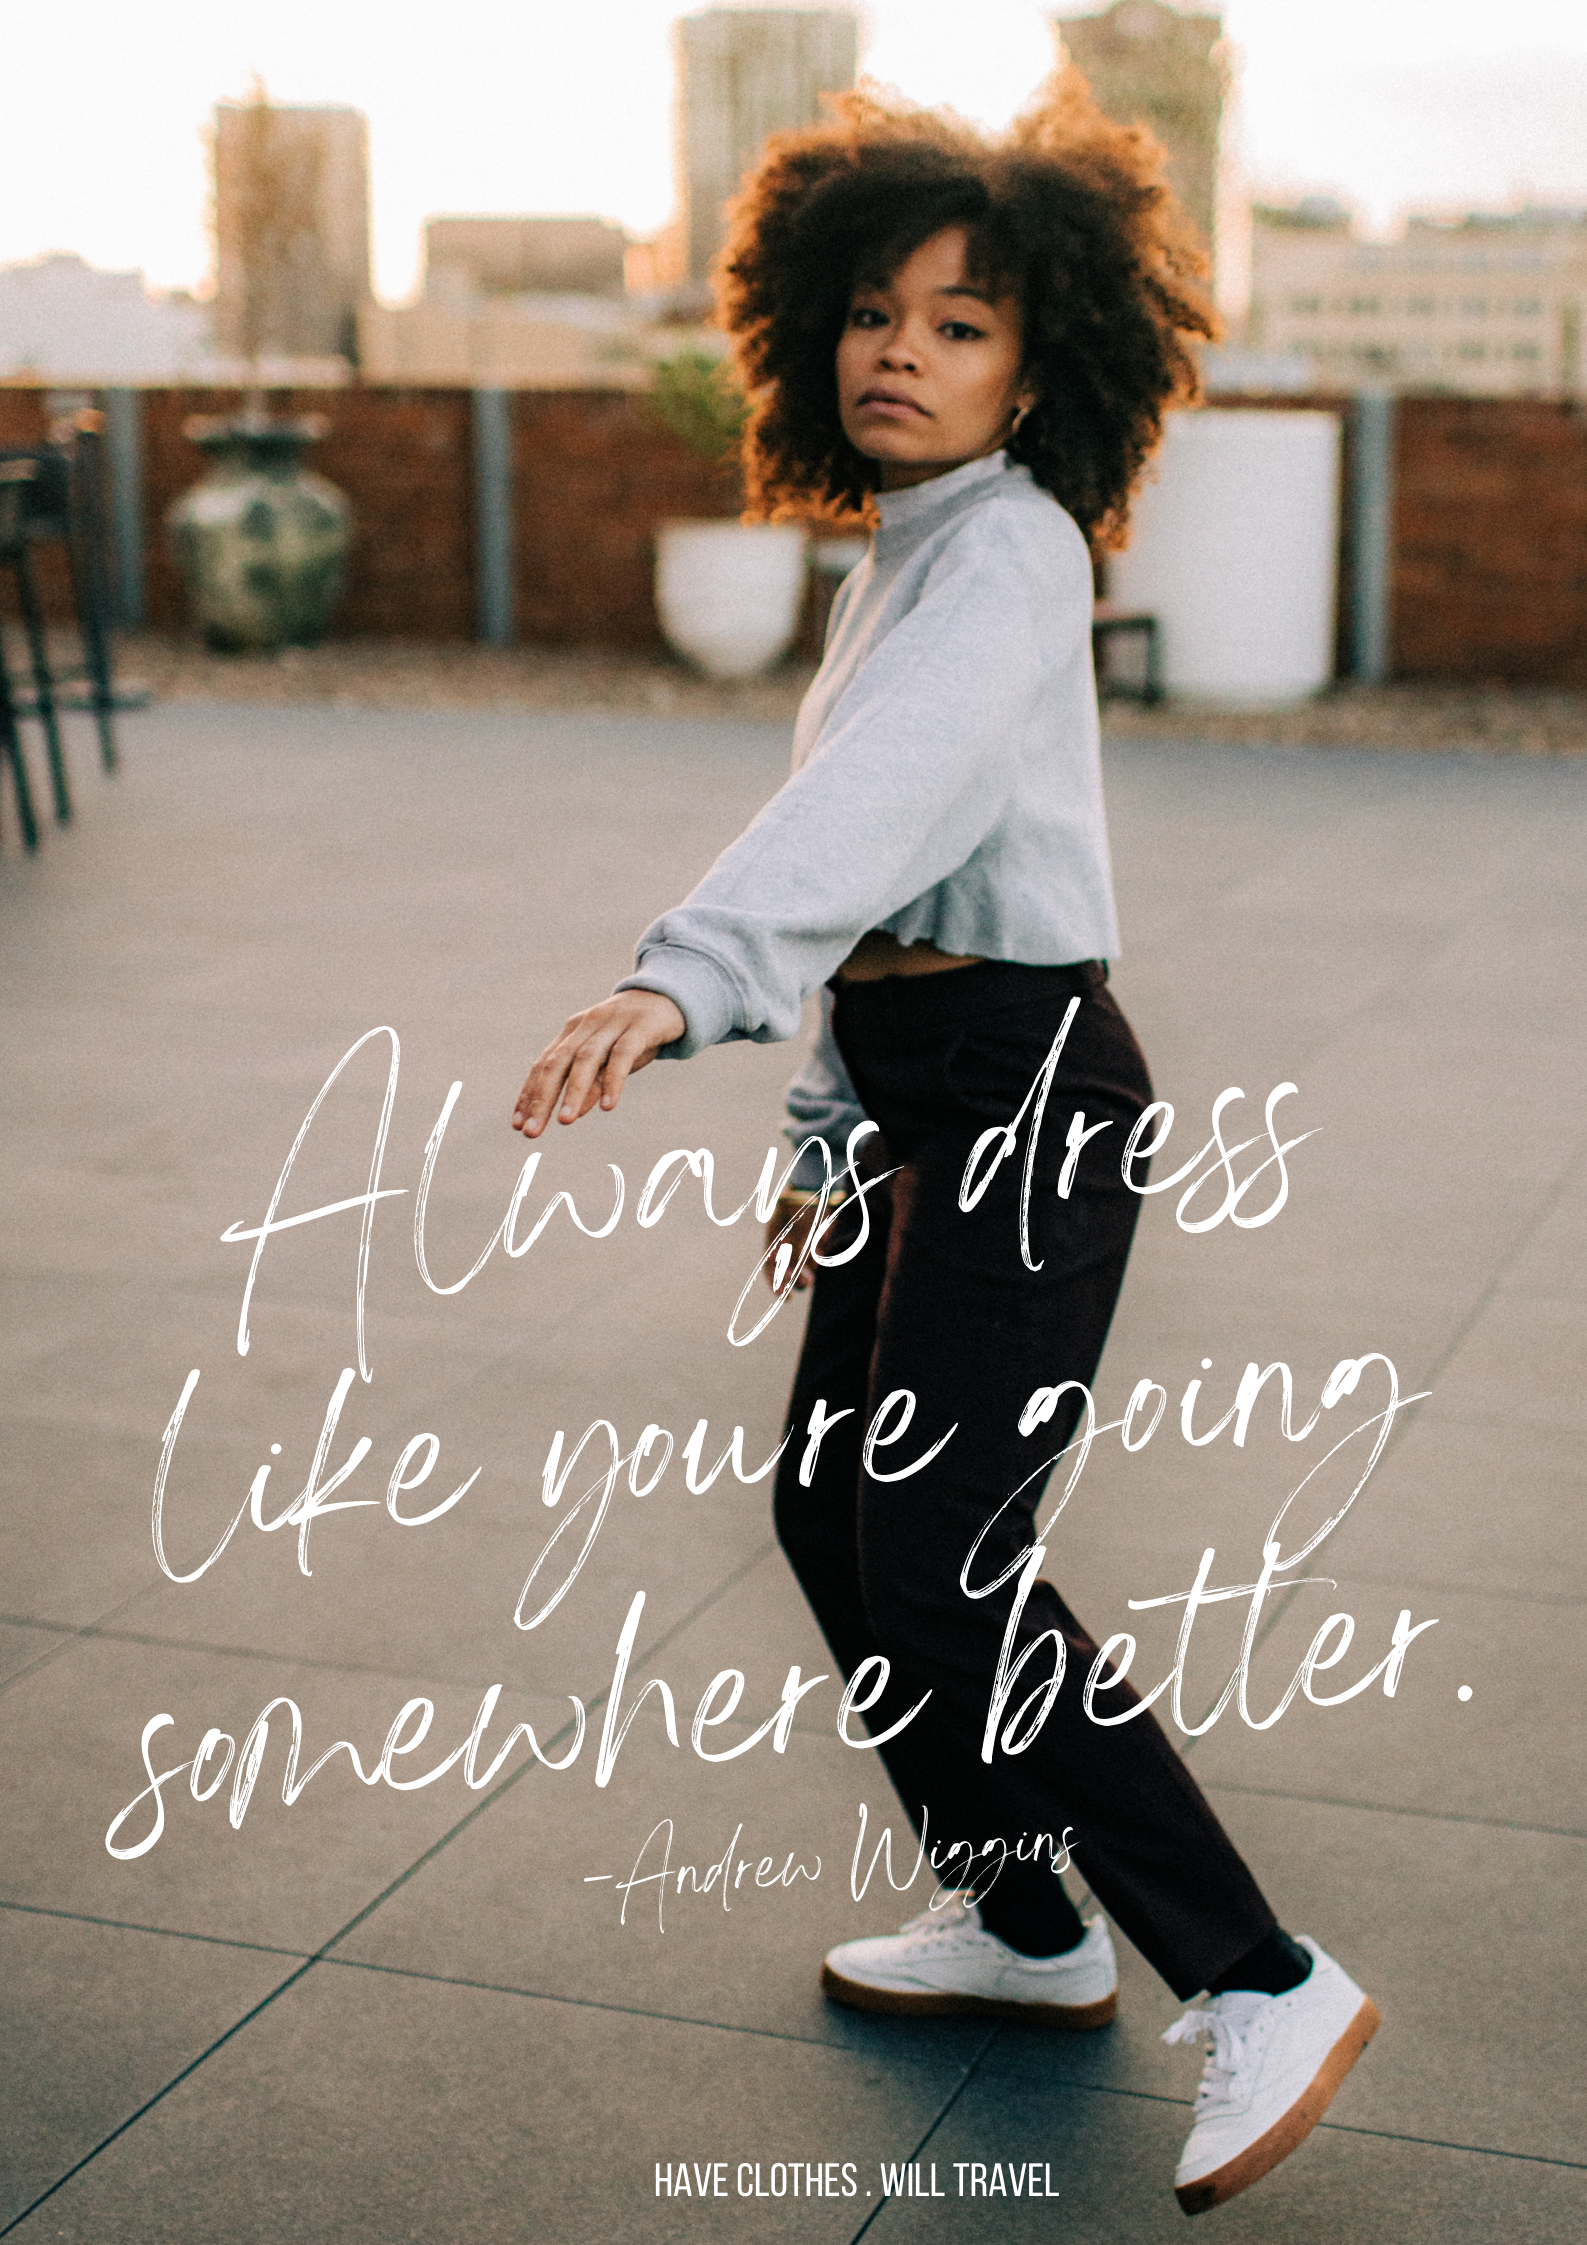 A young women poses outdoors at sunset on a rooftop courtyard. She's wearing a casual gray cropped sweatshirt and black pants. White handwritten-style text over the image says, "Always dress like you're going somewhere better. - Andrew Wiggins"